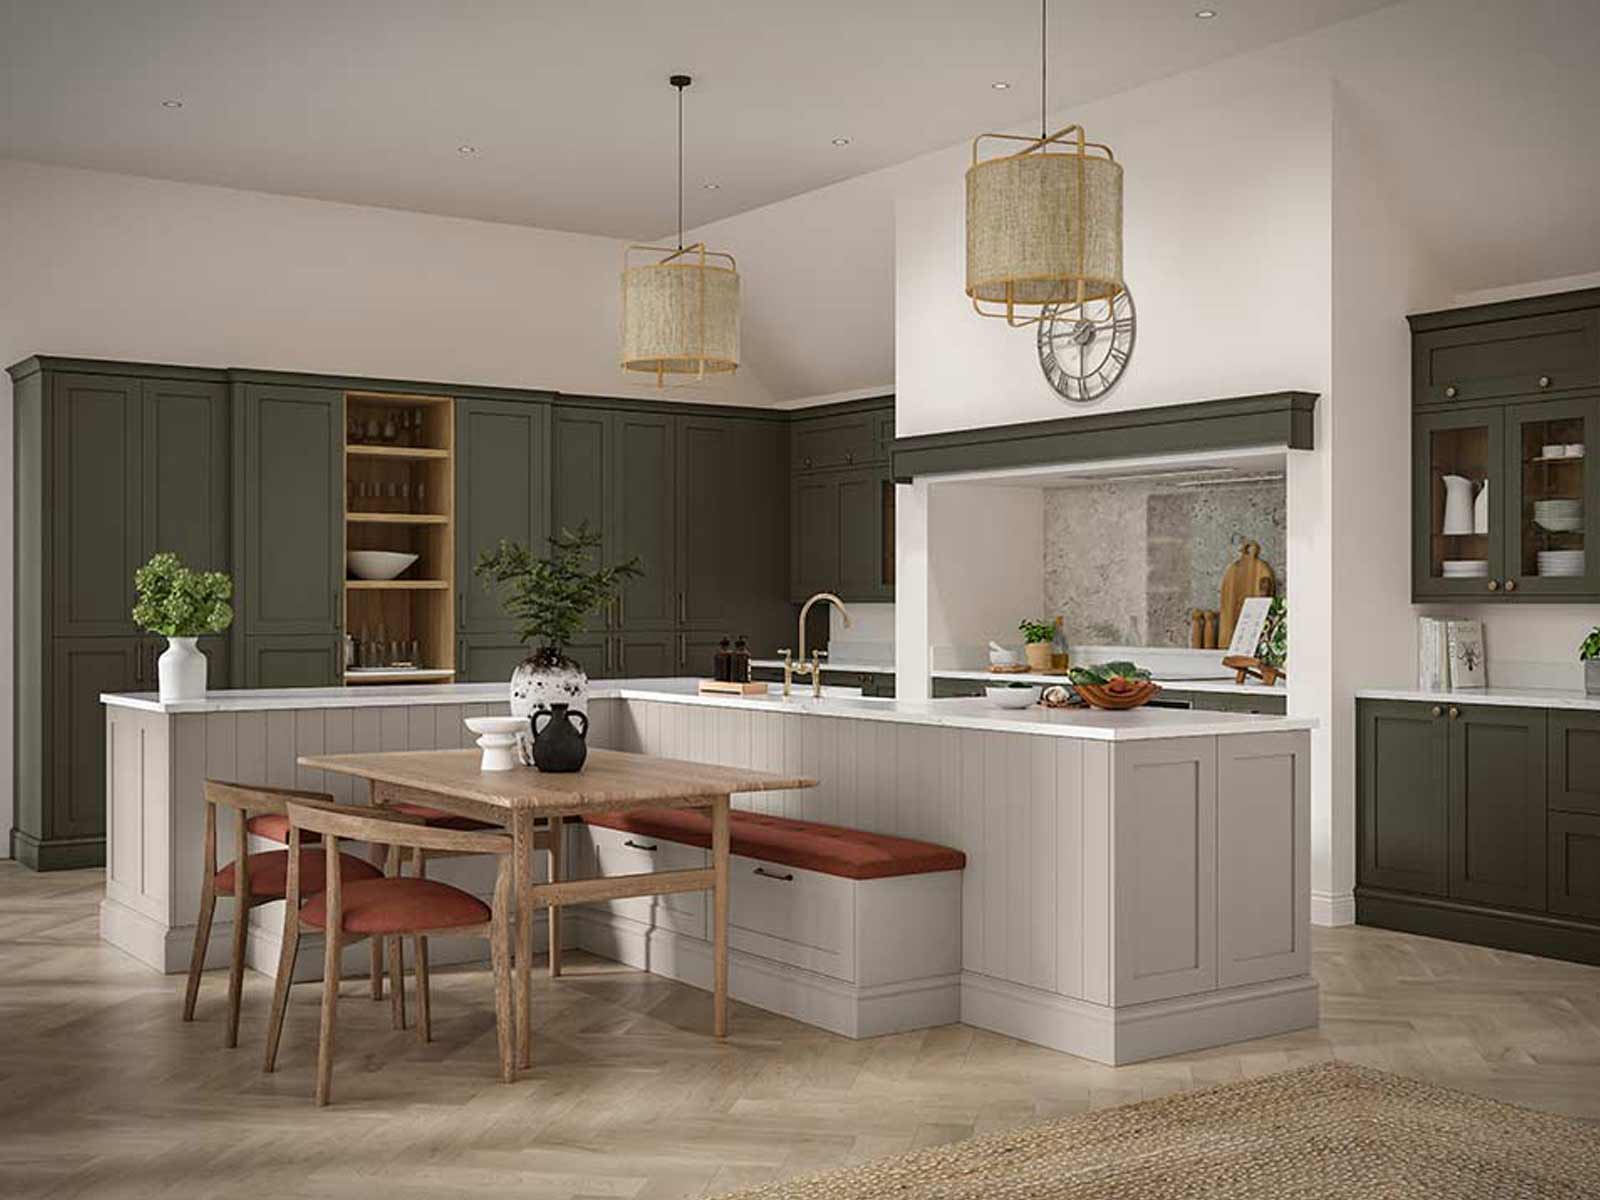 Large grey and dark green kitchen with gold accessories